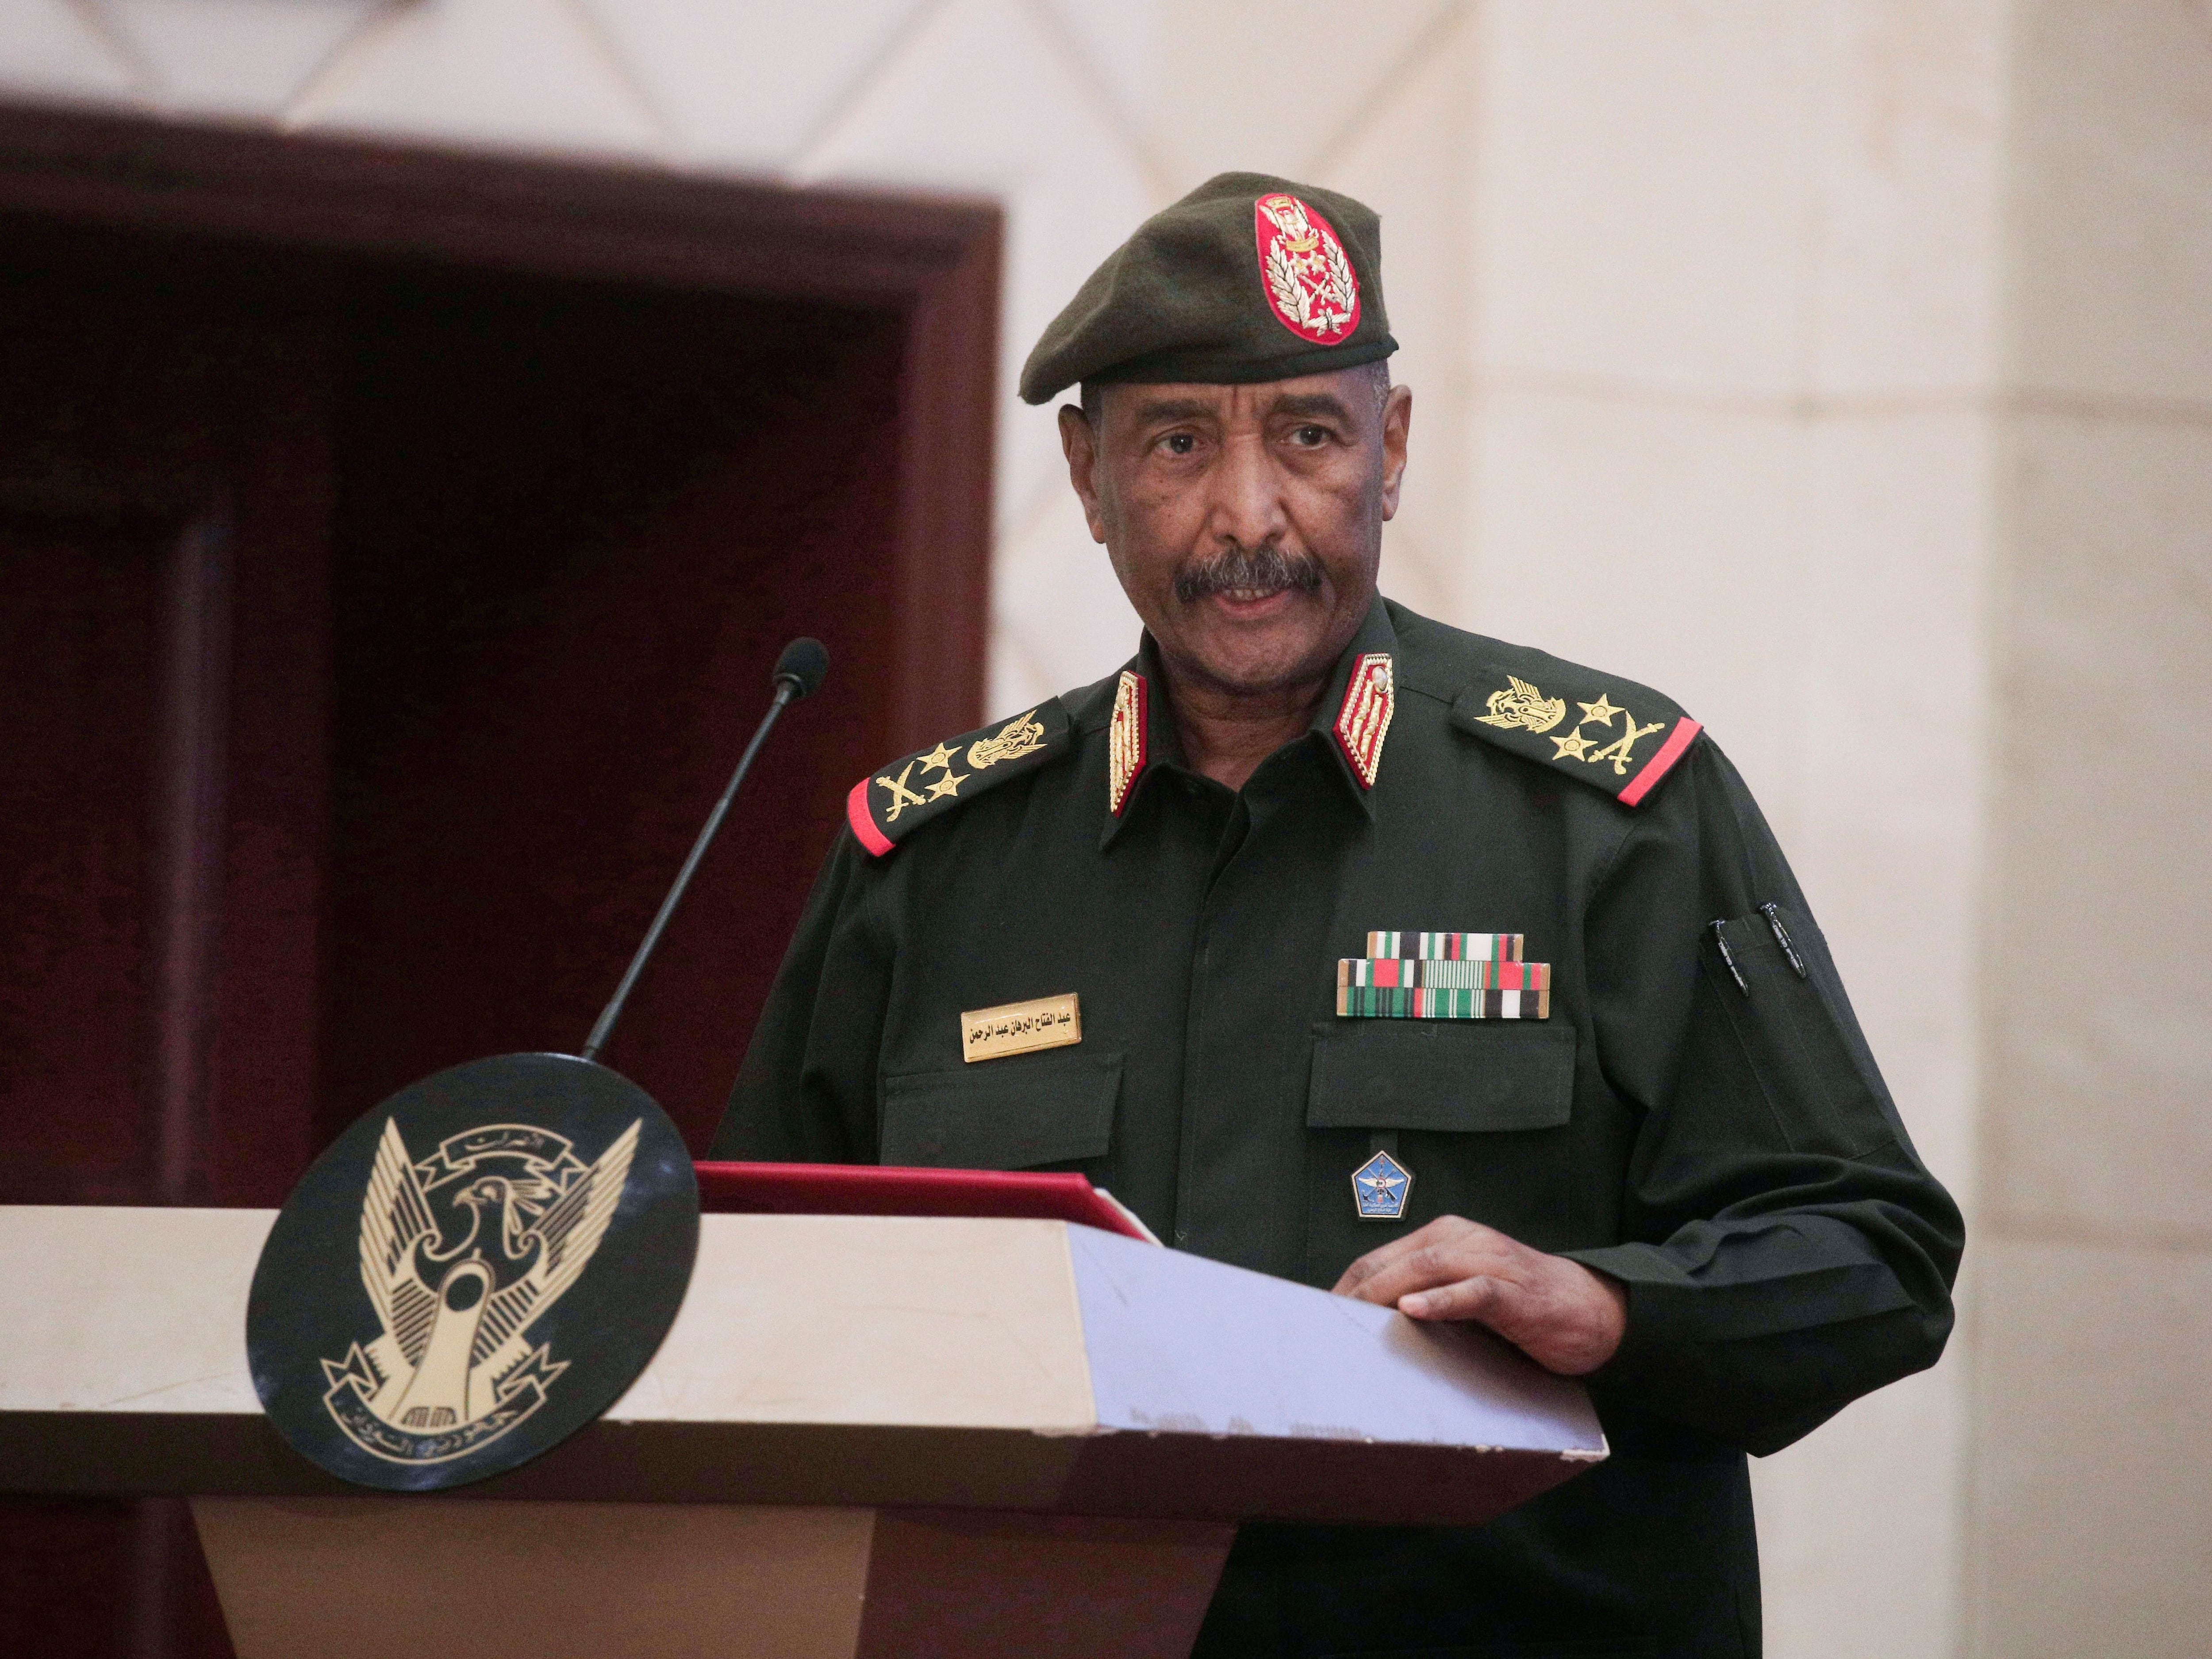 Sudan’s top military commander survives deadly drone strike at army ceremony